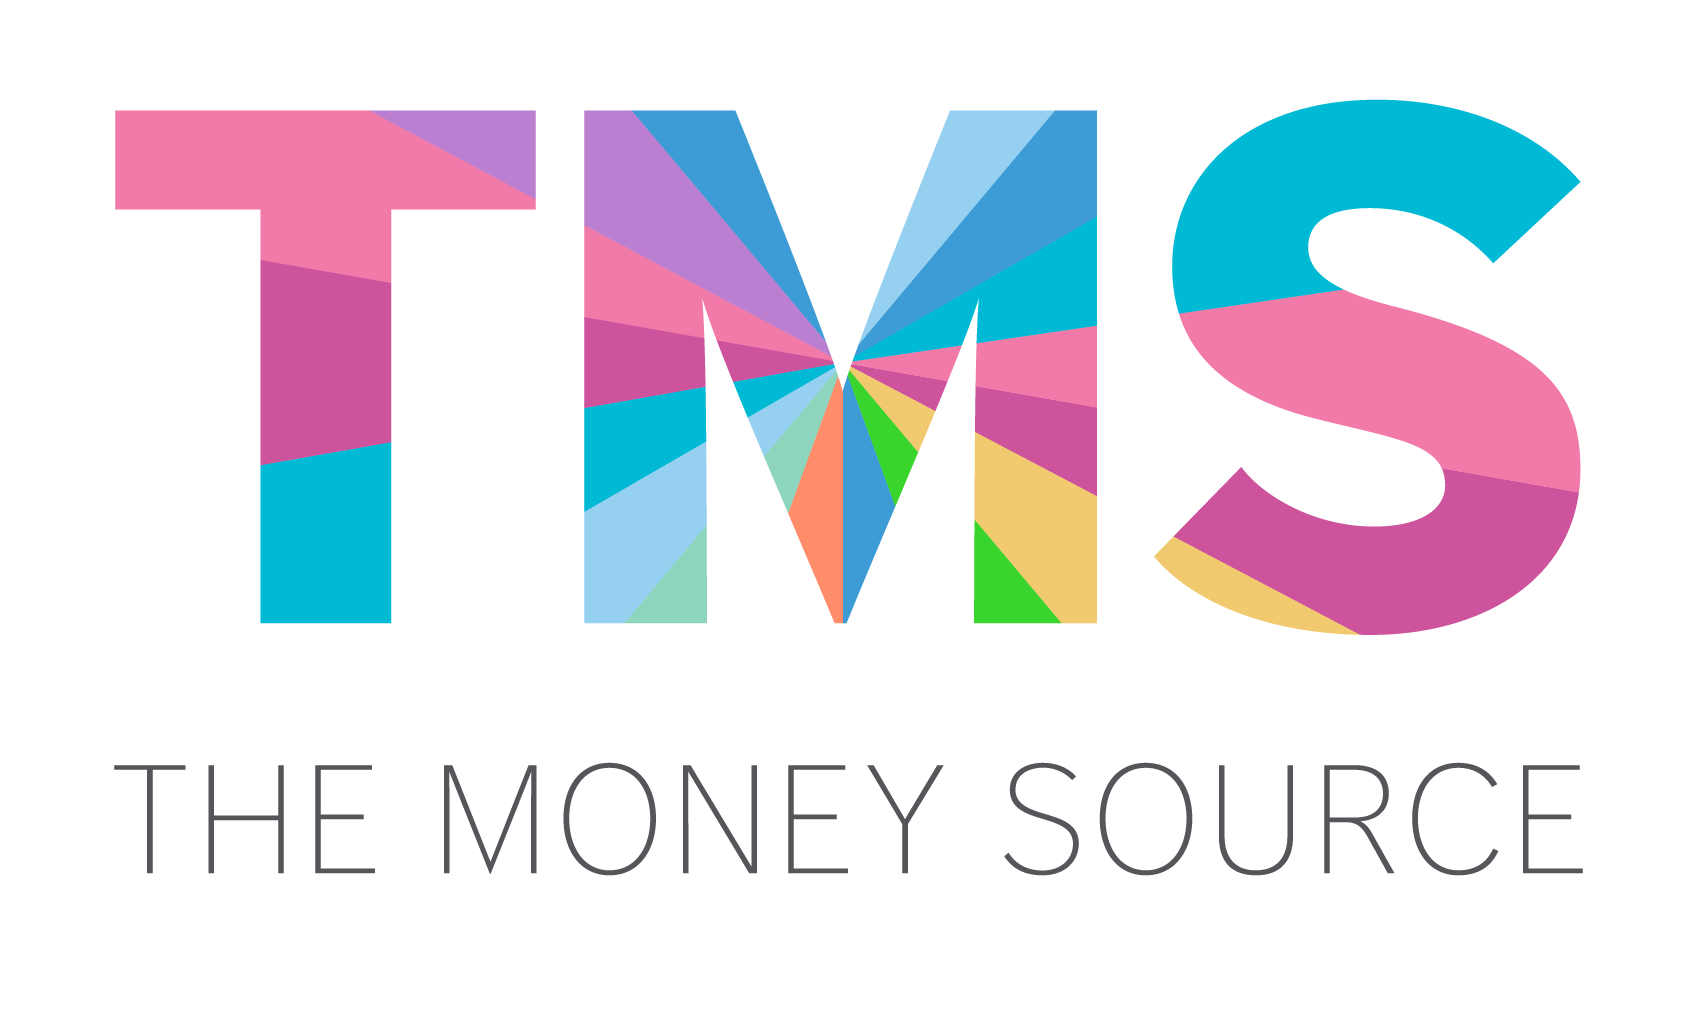 TMS has announced the sale of its origination line of business to national fintech lender AmeriSave Mortgage Corporation